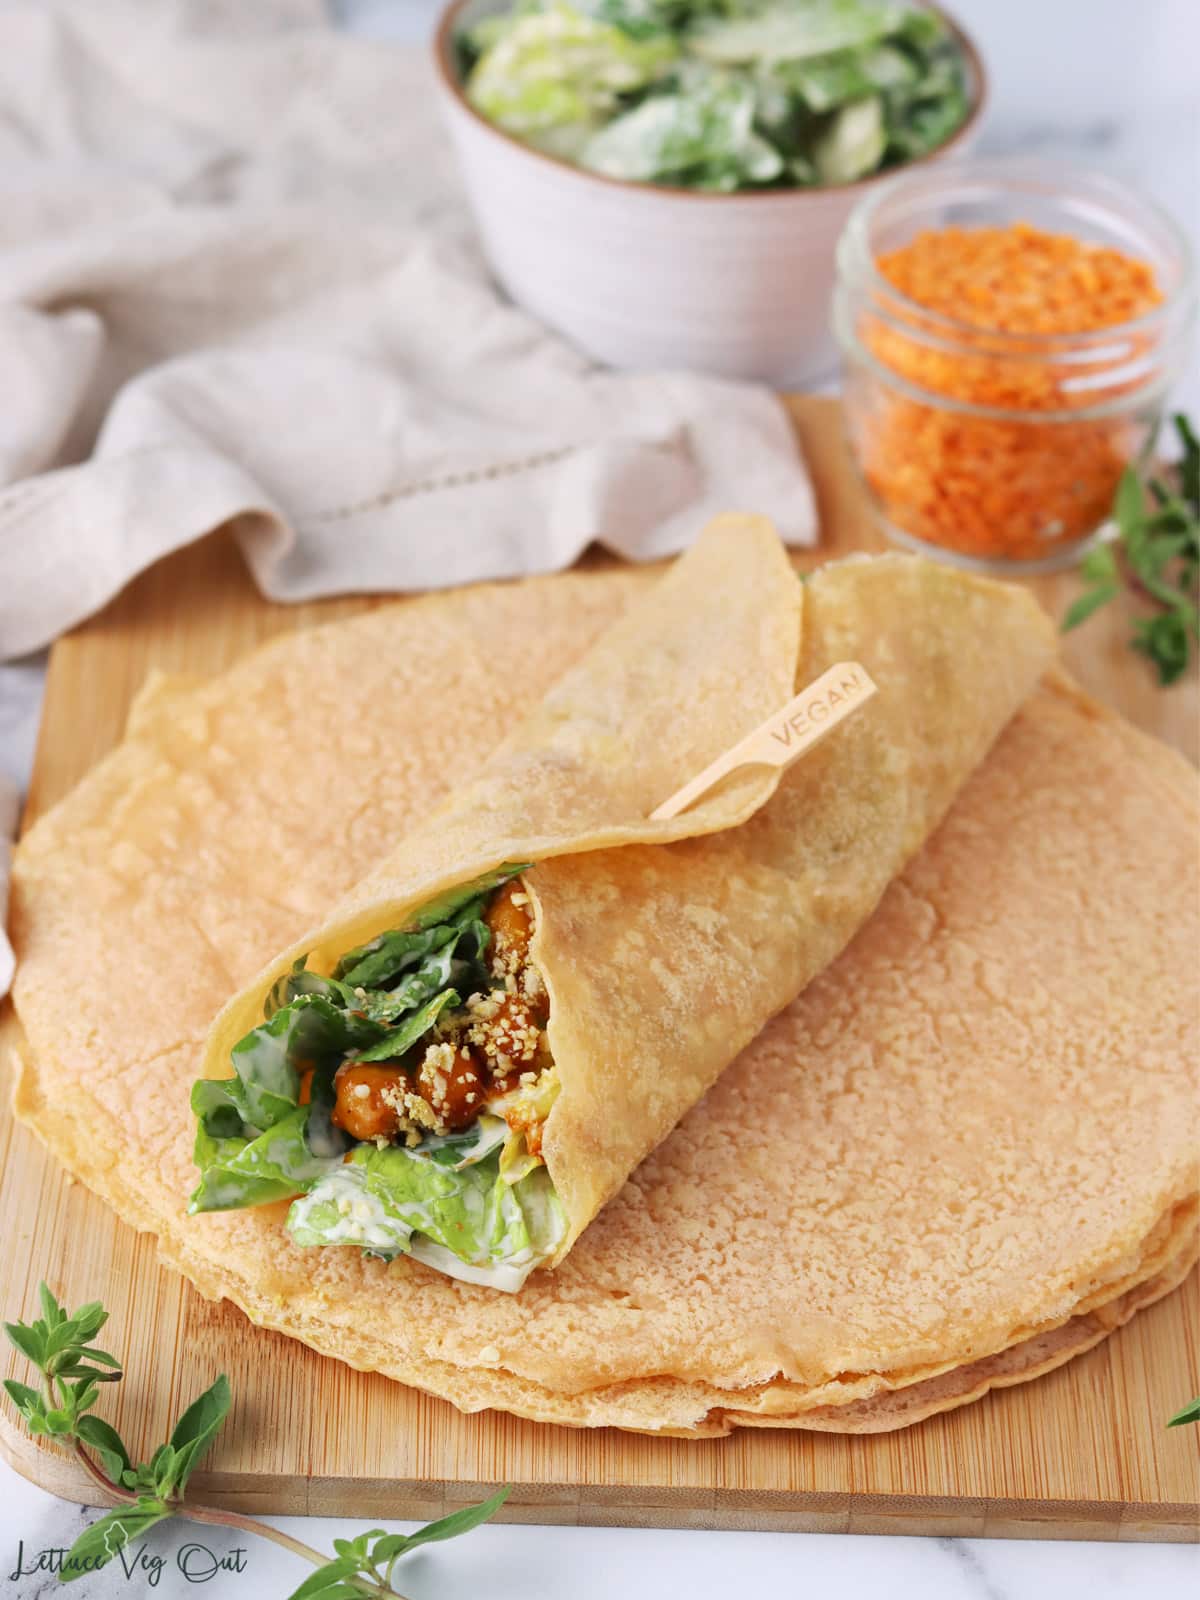 Stack of red lentil tortillas with one tortilla wrapped around salad on top.